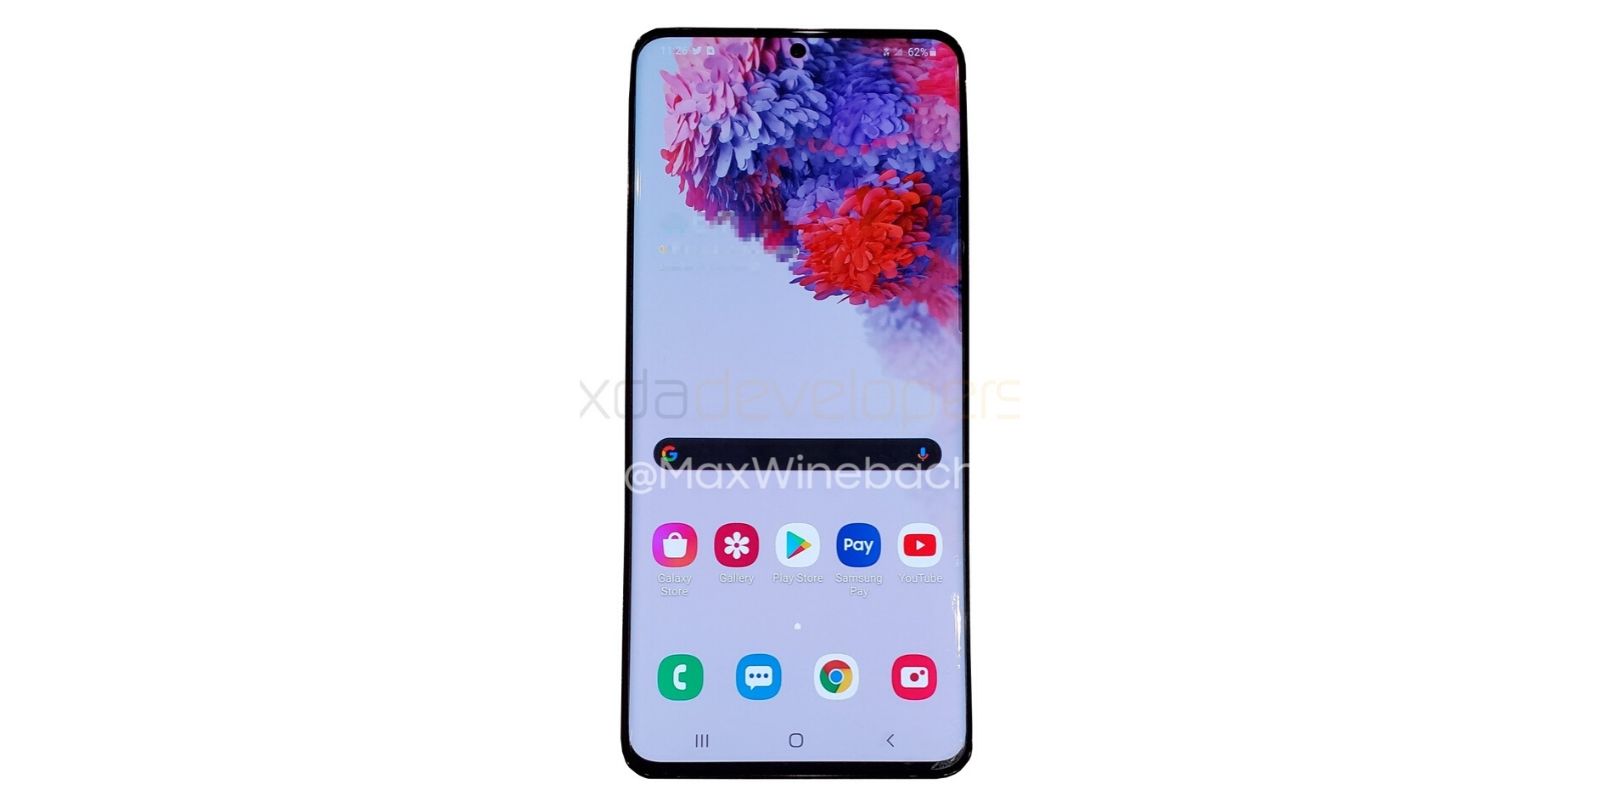 Samsung Galaxy S20 Leaks: Four Cameras, Infinity-O Display, And 5G